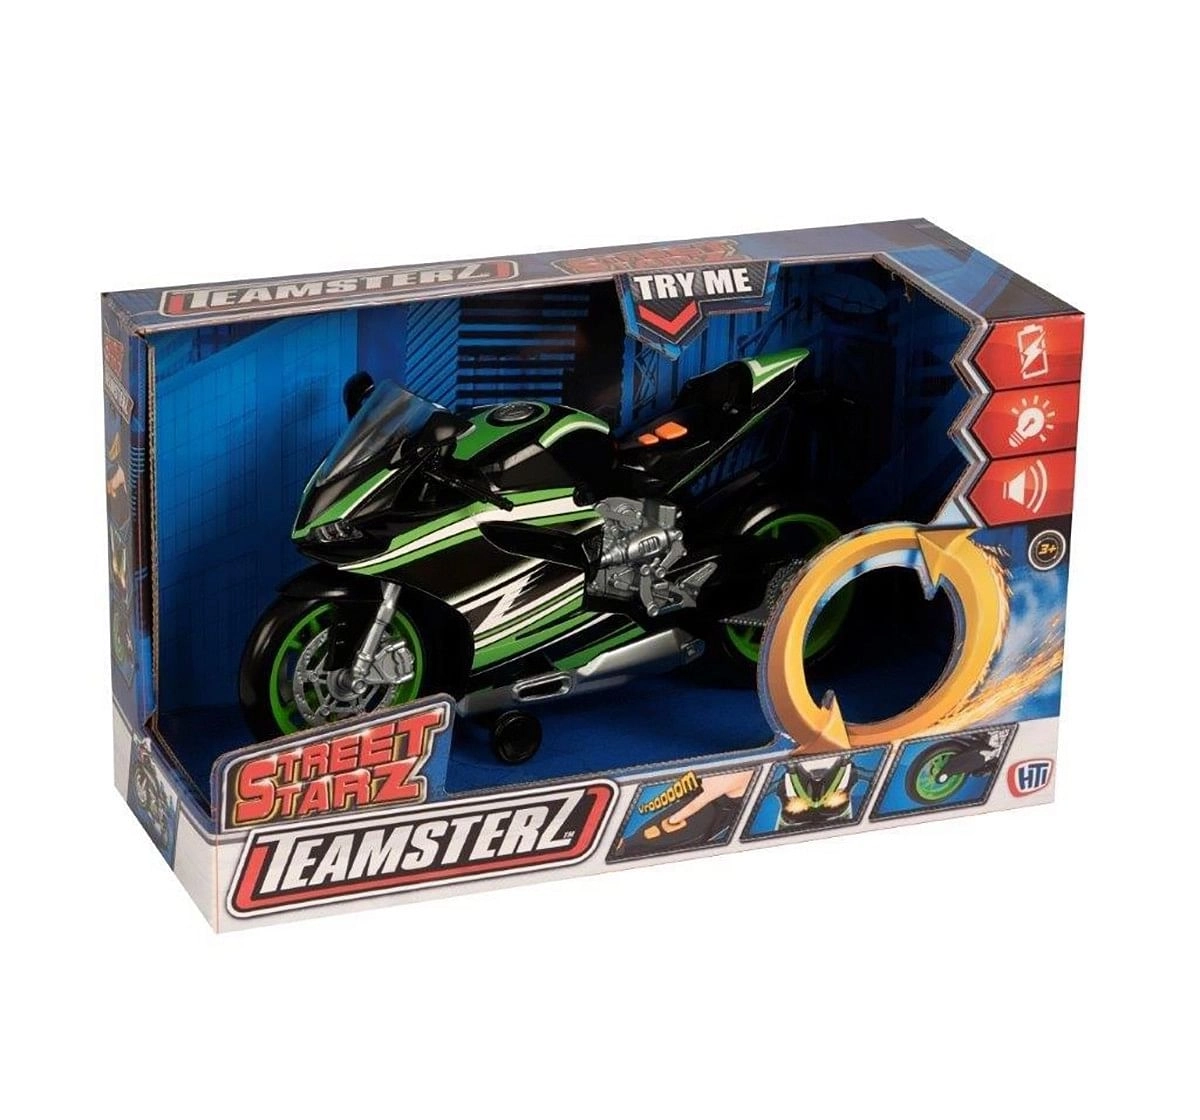 Teamsterz Light And Sound Black Motorbike Vehicles for Kids age 3Y+ 